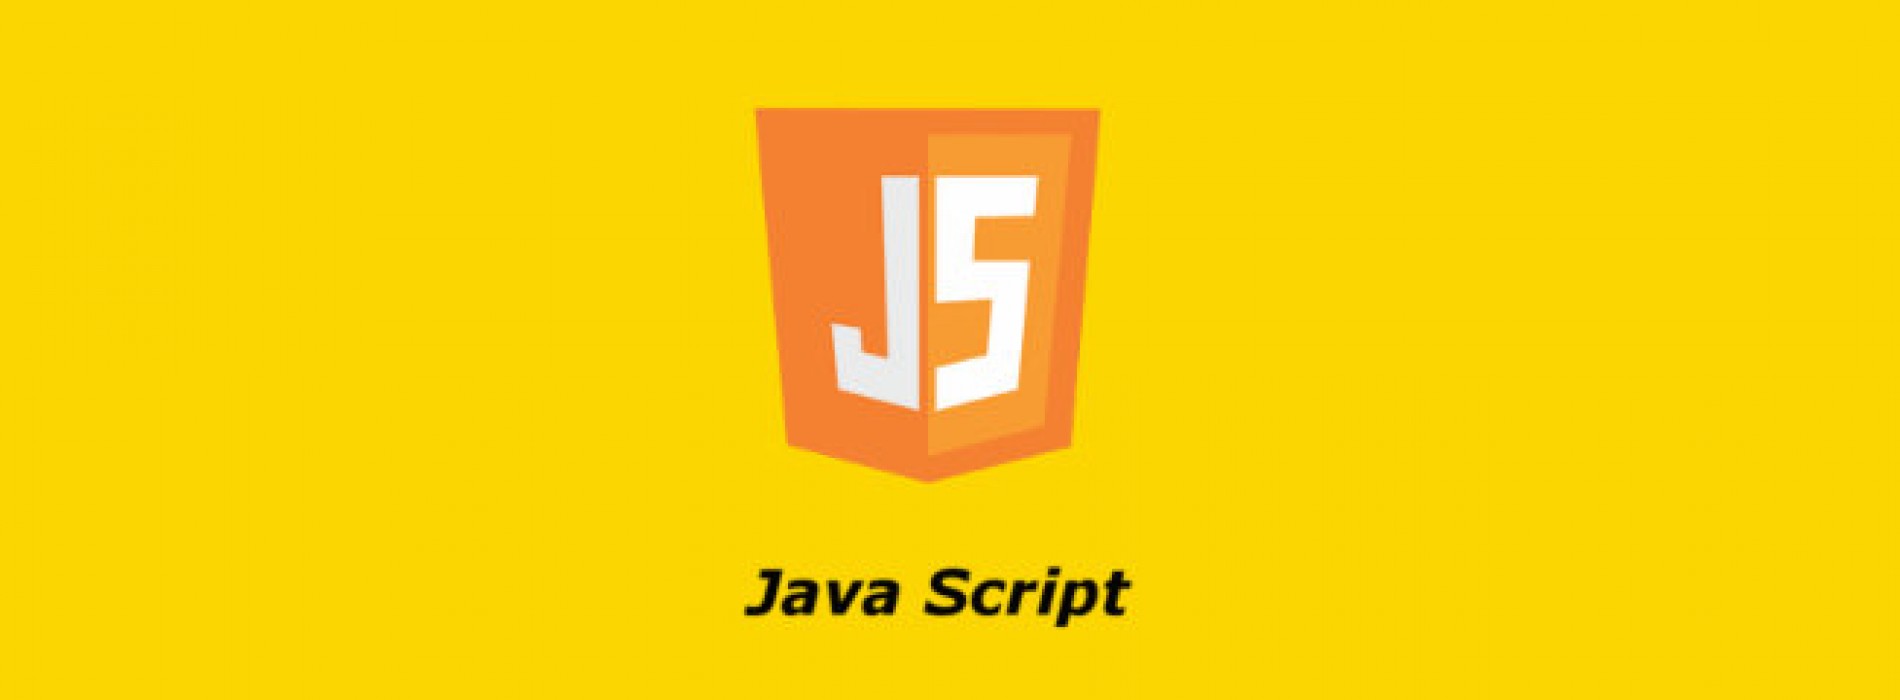 Common Use Cases of JavaScript